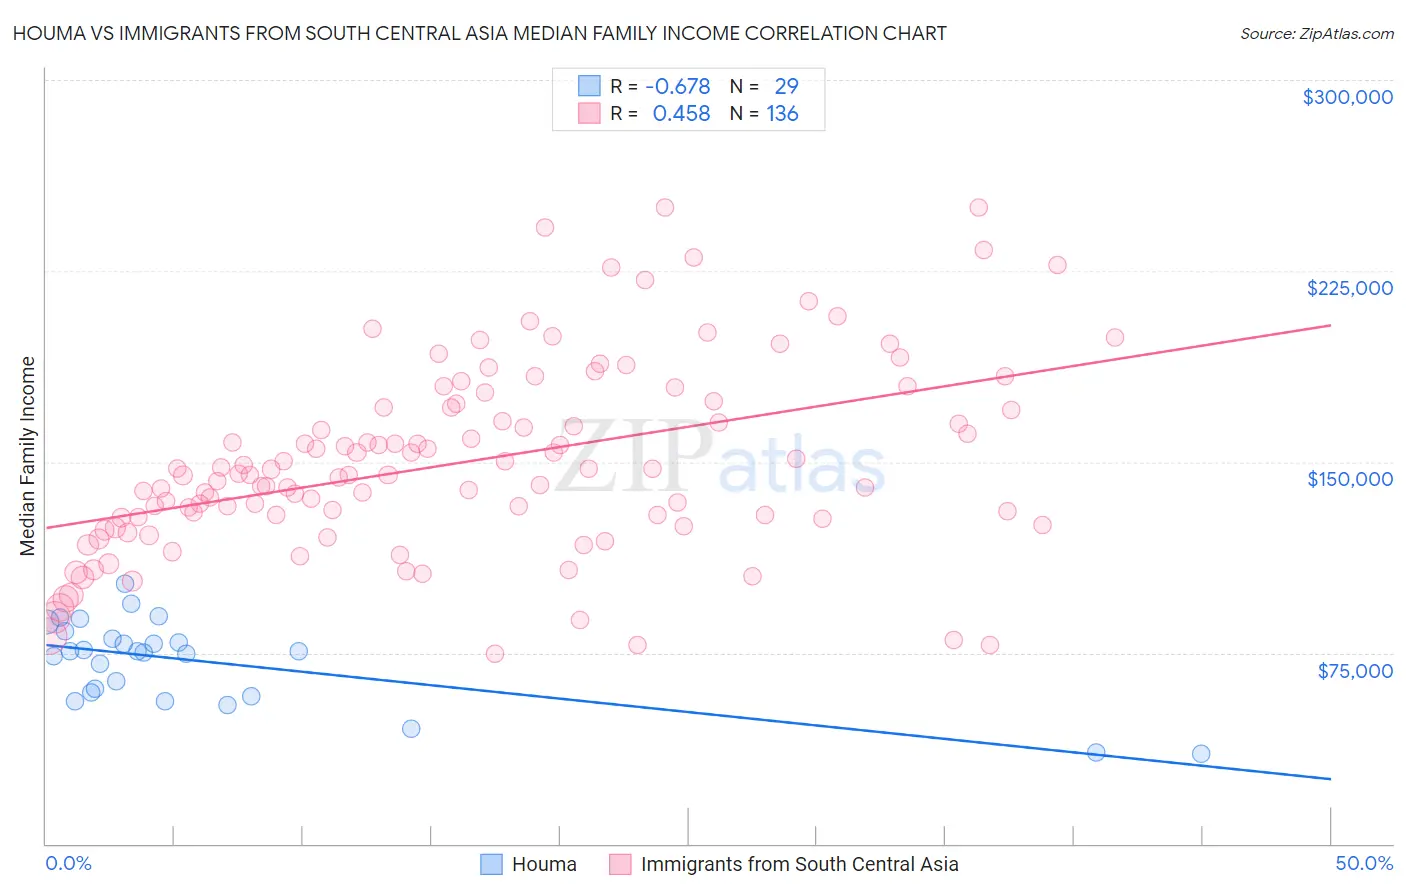 Houma vs Immigrants from South Central Asia Median Family Income